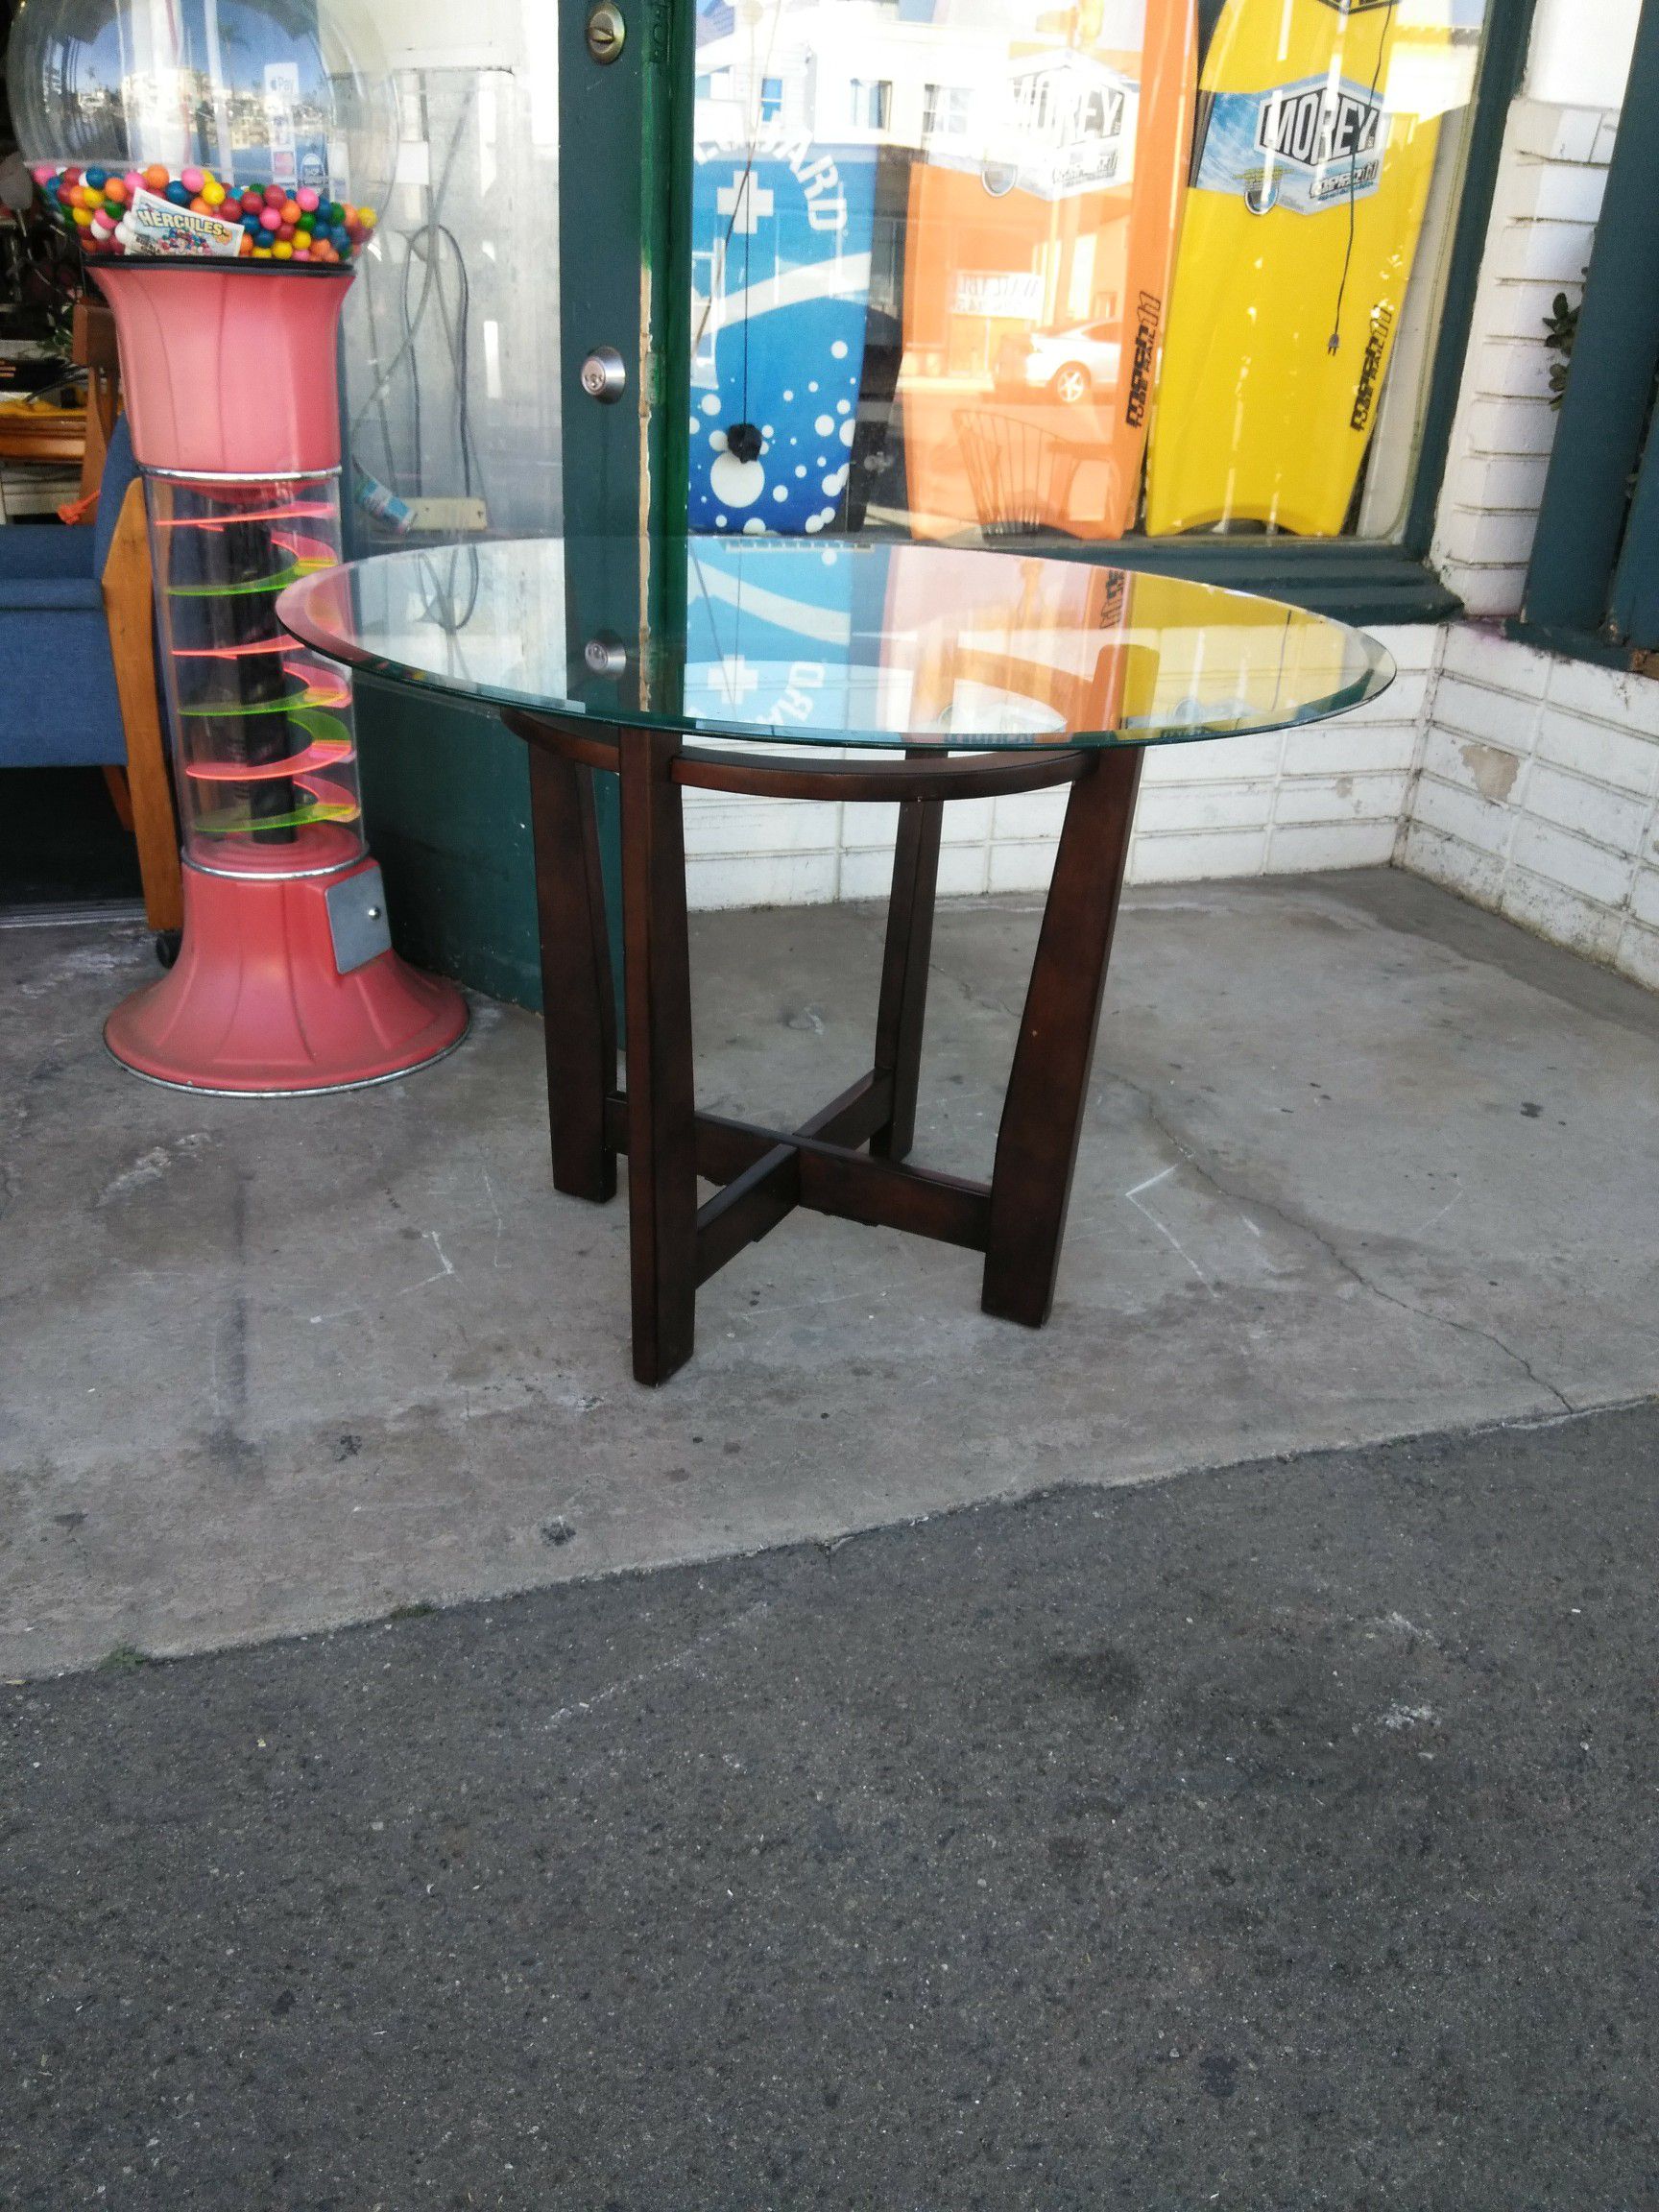 42" Diameter Glass Top Dining Table